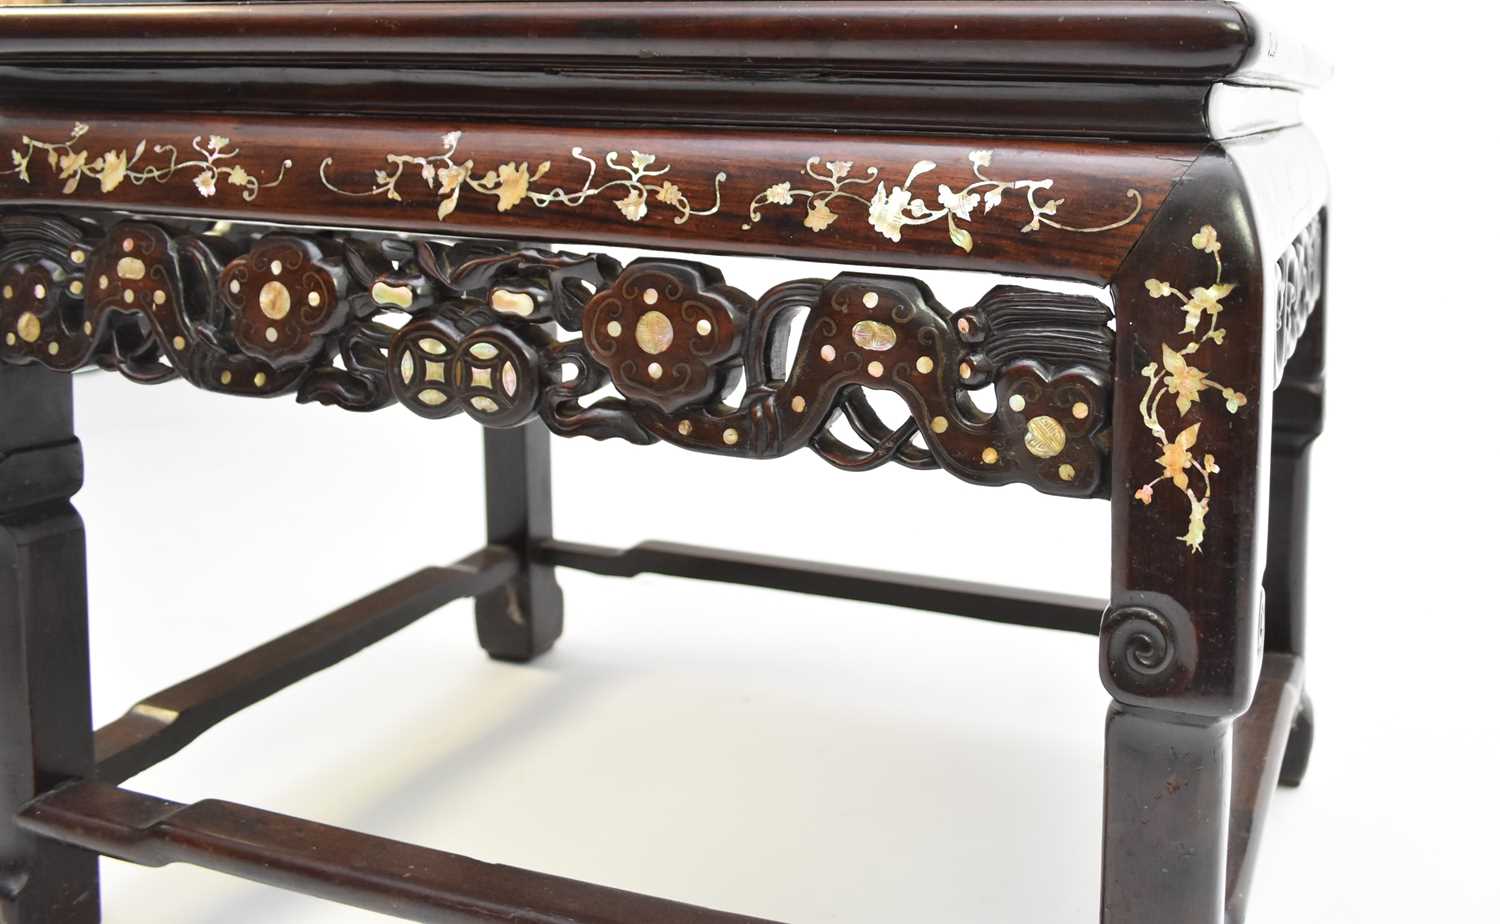 A Chinese inlaid rosewood table or seat, Qing Dynasty - Image 6 of 6